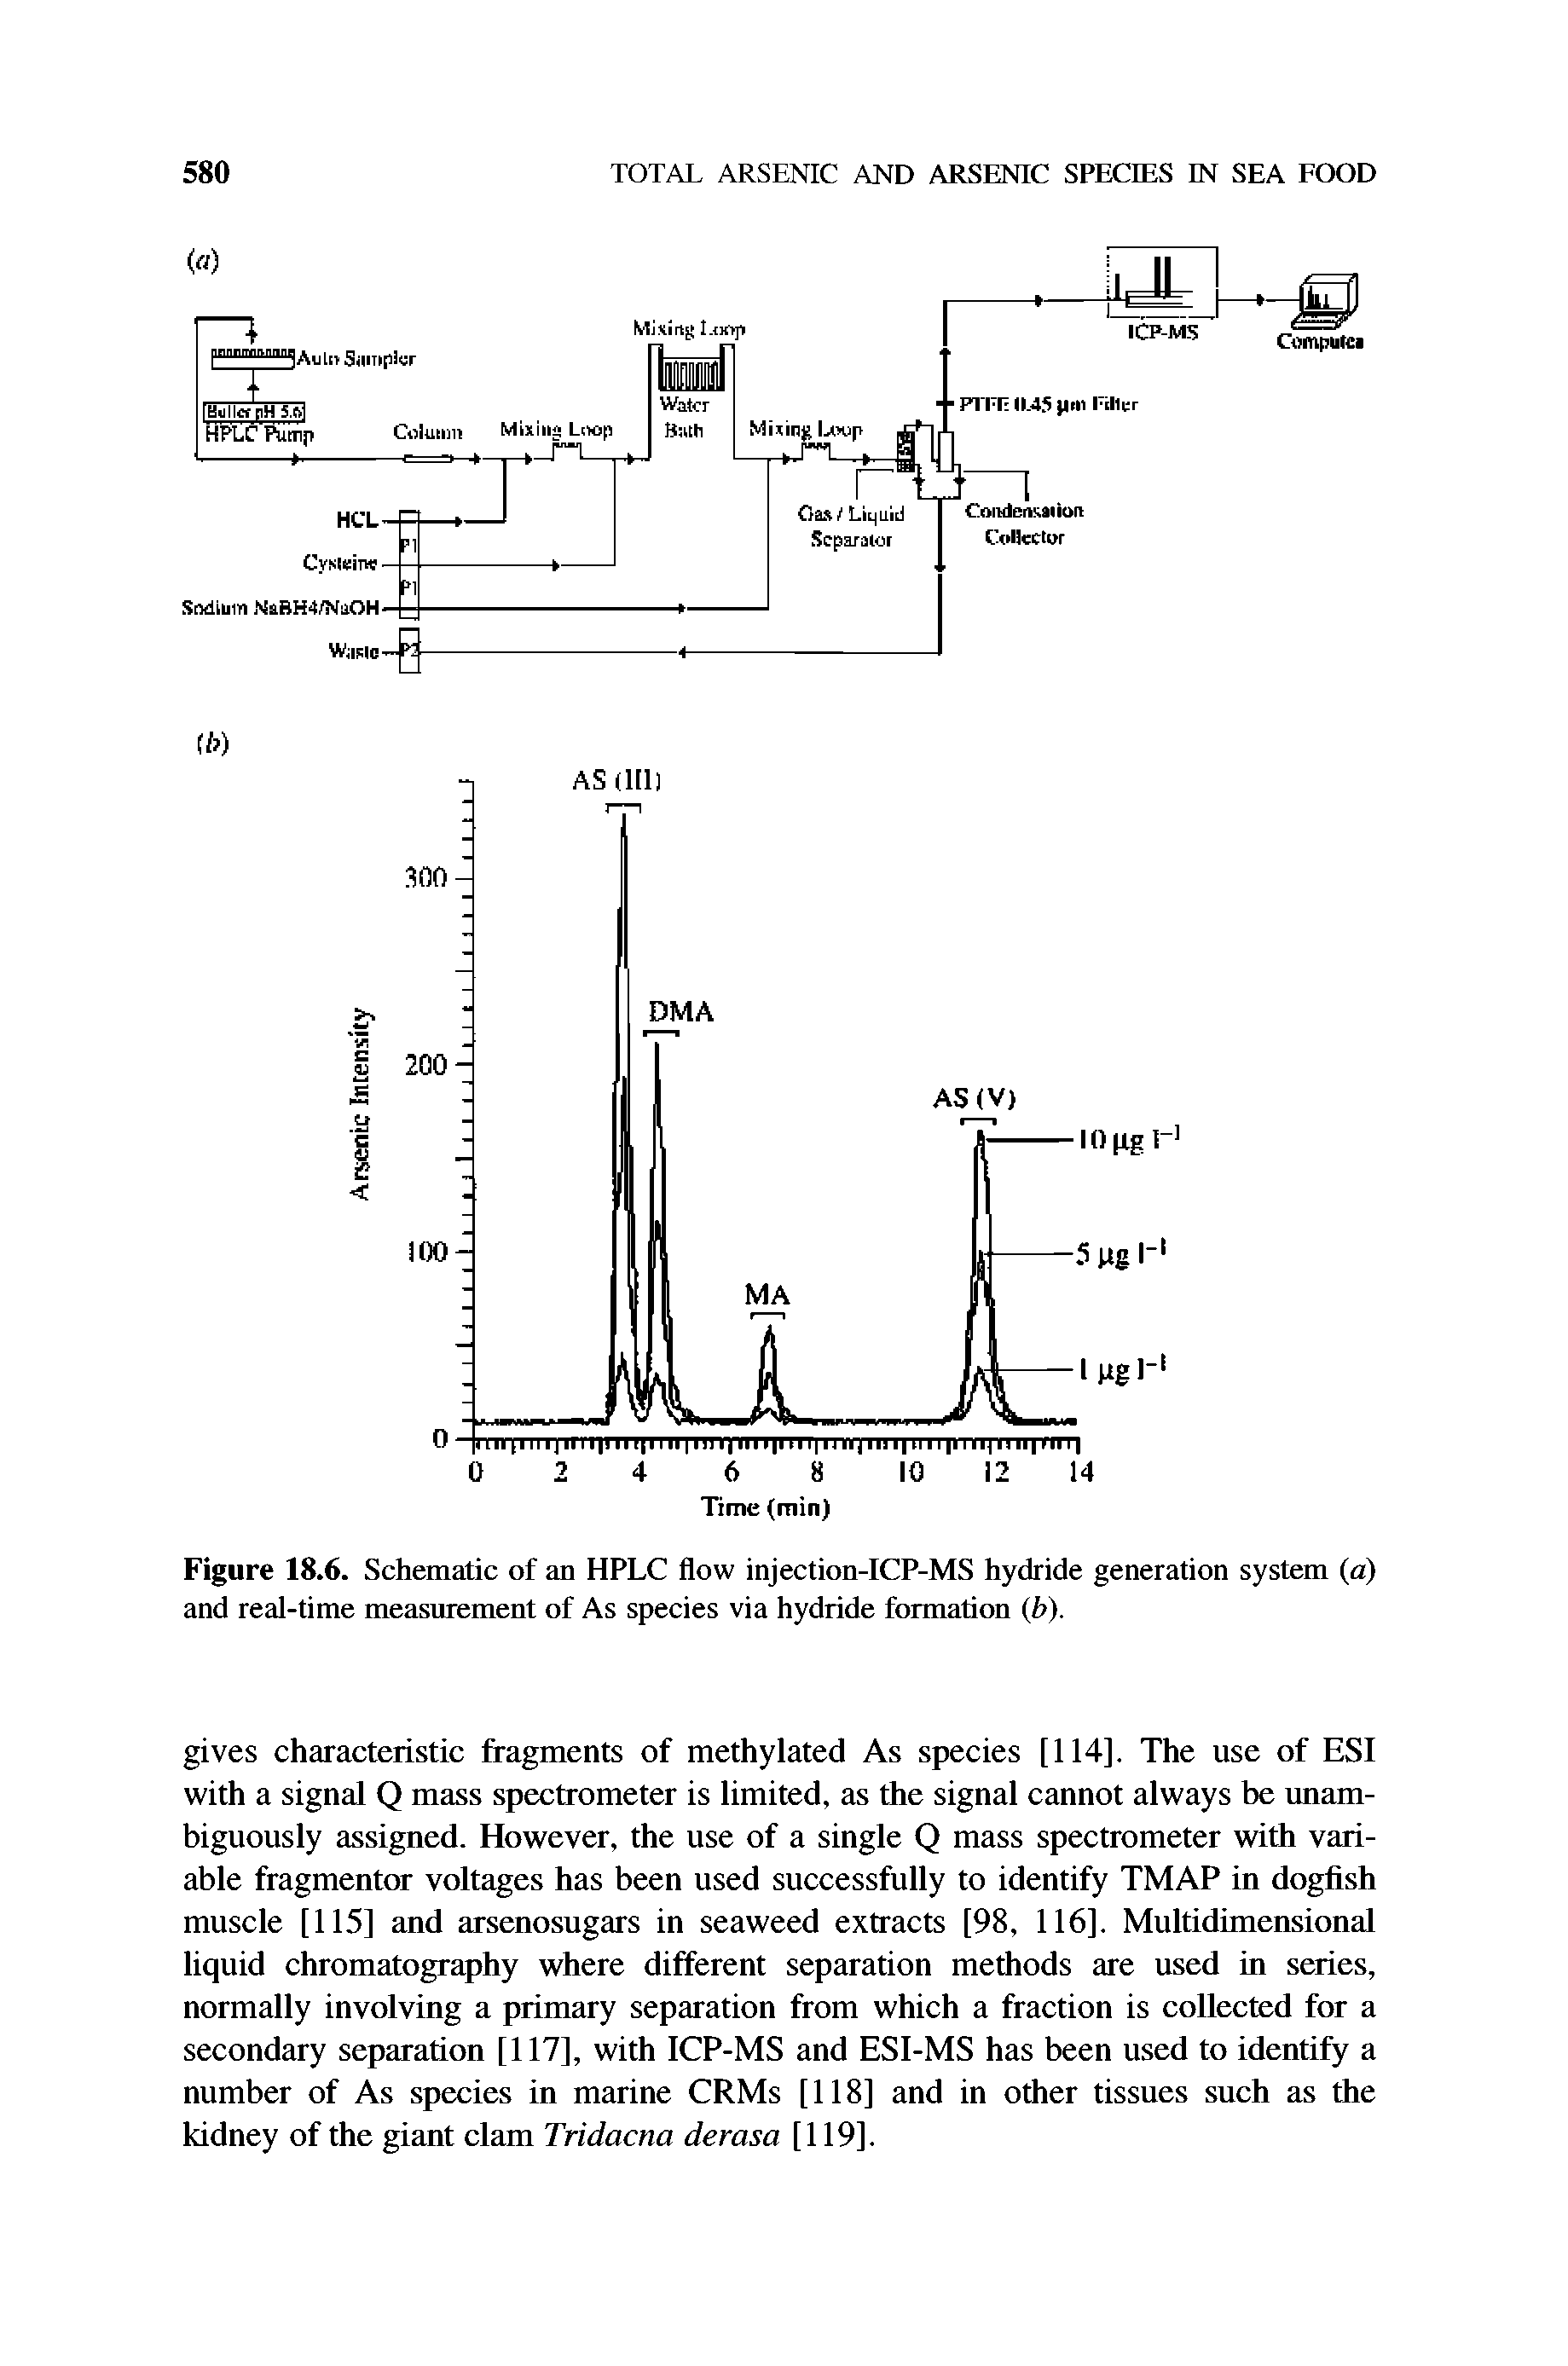 Figure 18.6. Schematic of an HPLC flow injection-ICP-MS hydride generation system (a) and real-time measurement of As species via hydride formation (b).